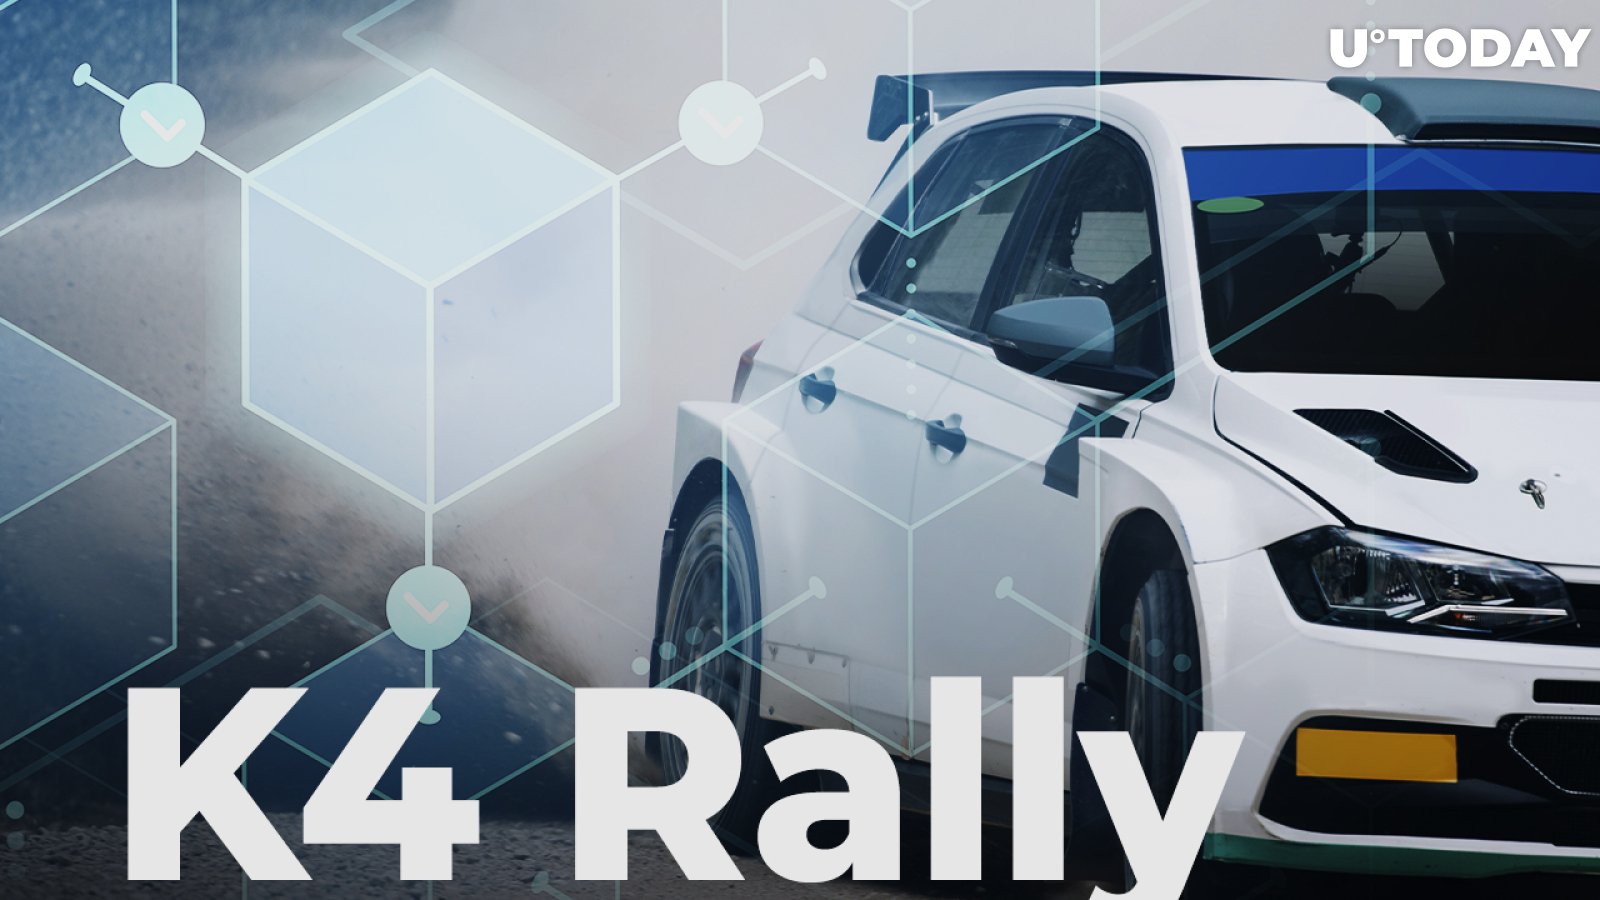 K4 Rally Introduces Blockchain-Based Car Racing Ecosystem with Native Token